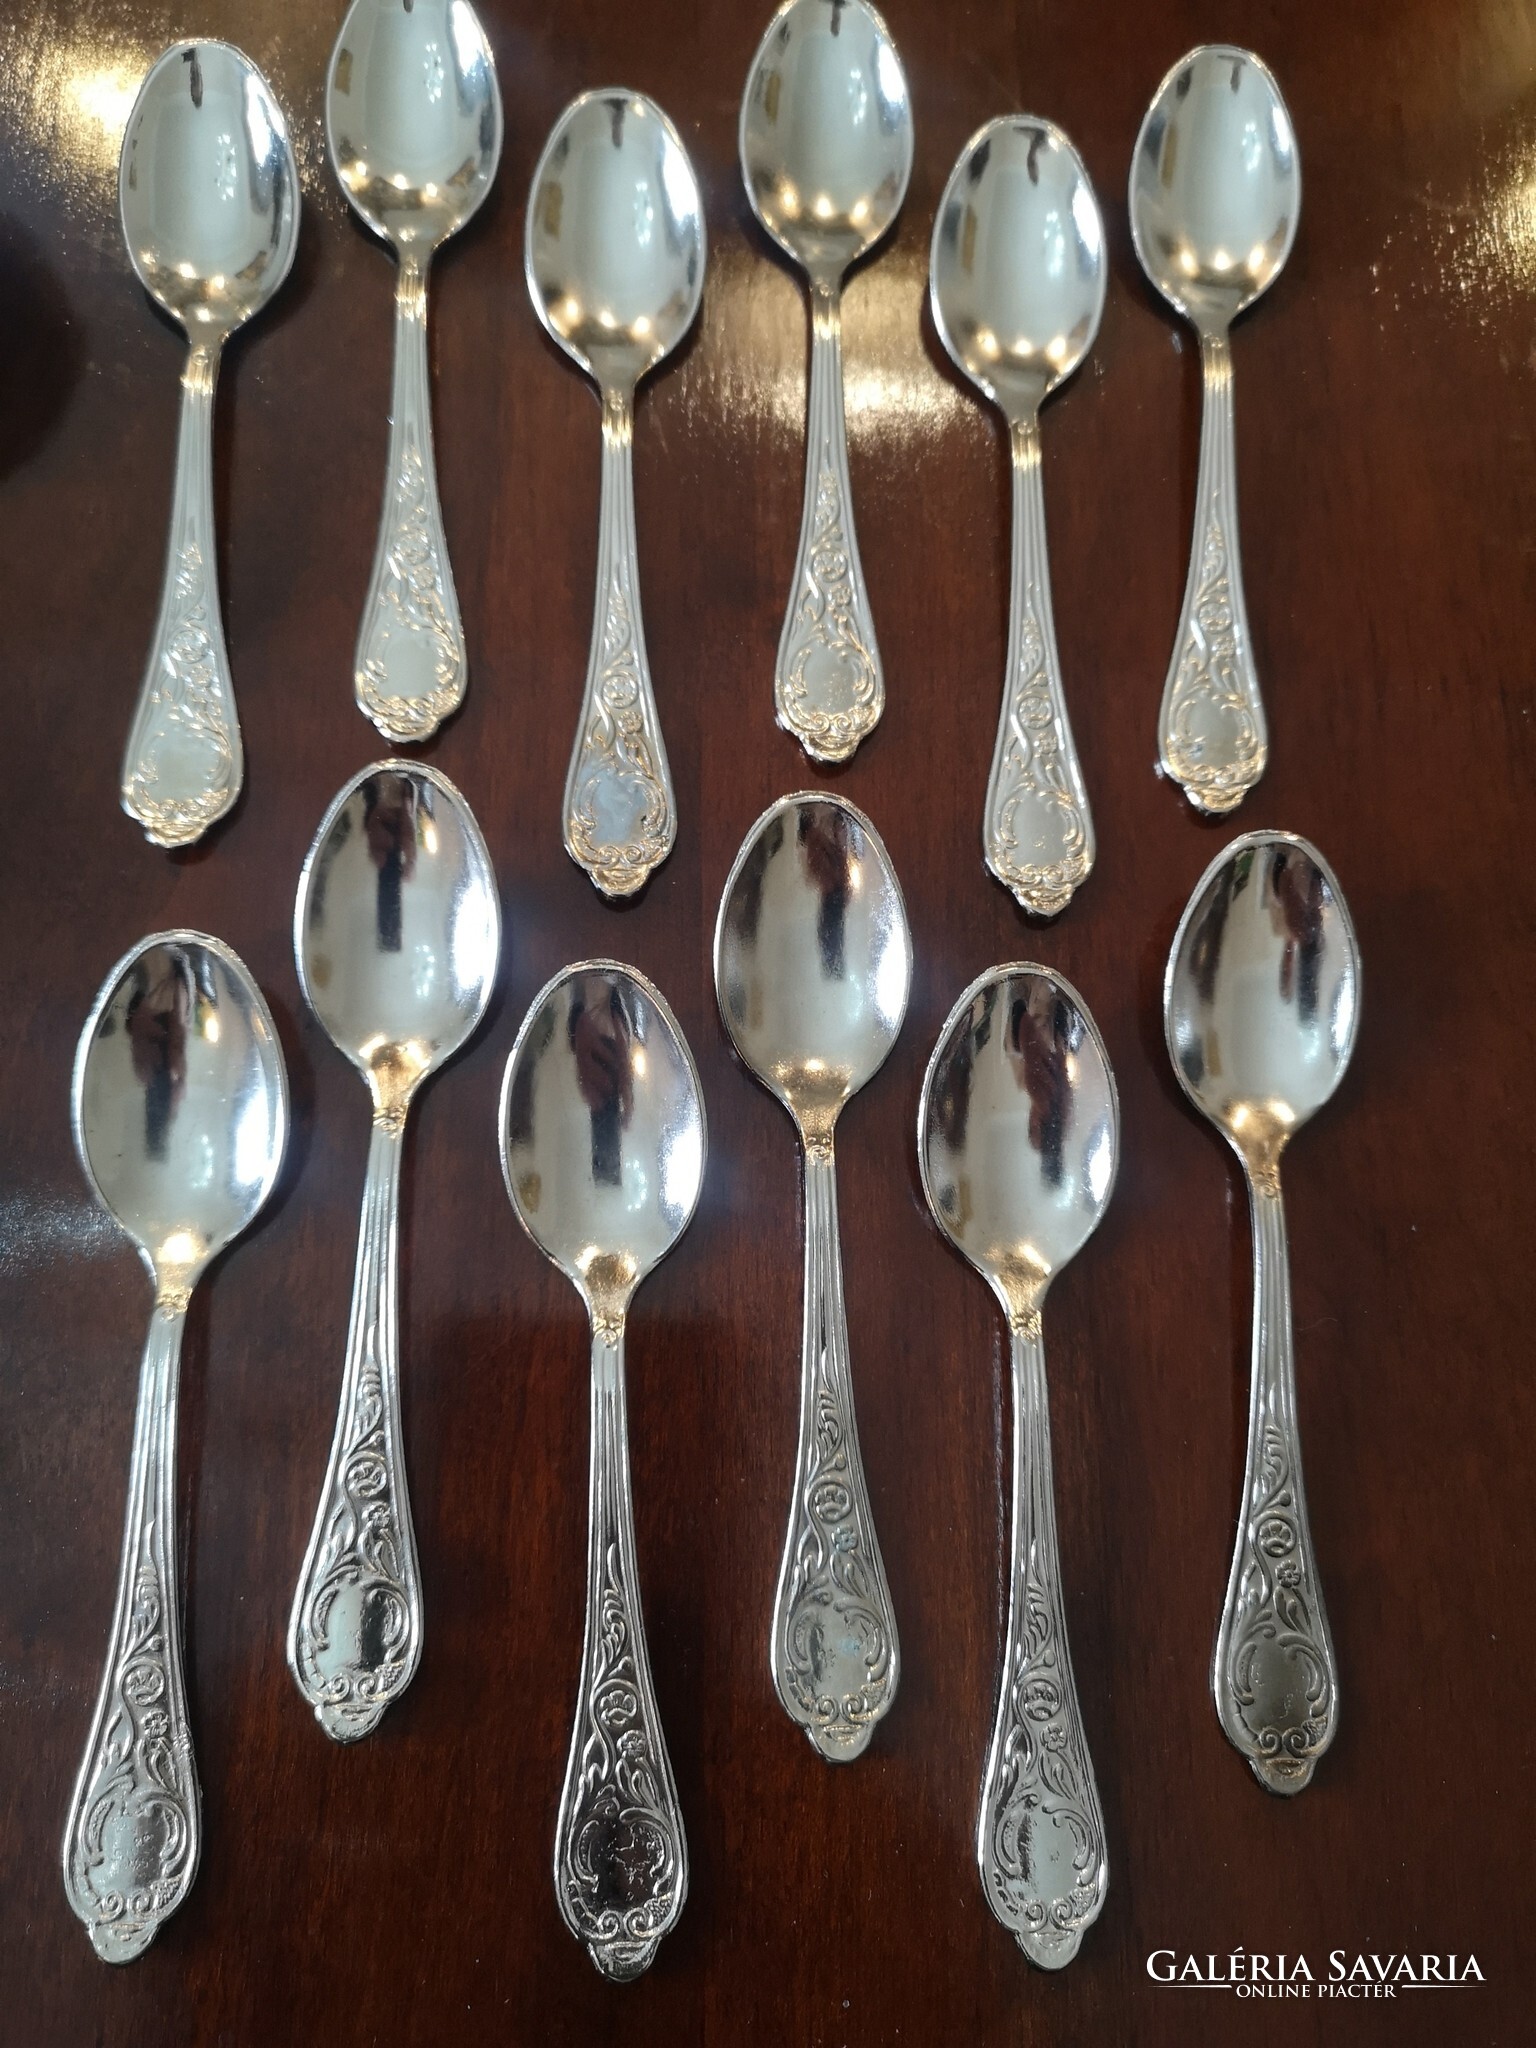 or set platform! Buy quality reliable, household - 12-person cutlery a 800 Home, Silver-plated italy arg - sell accessories Galeria | Savaria on online marketplace online